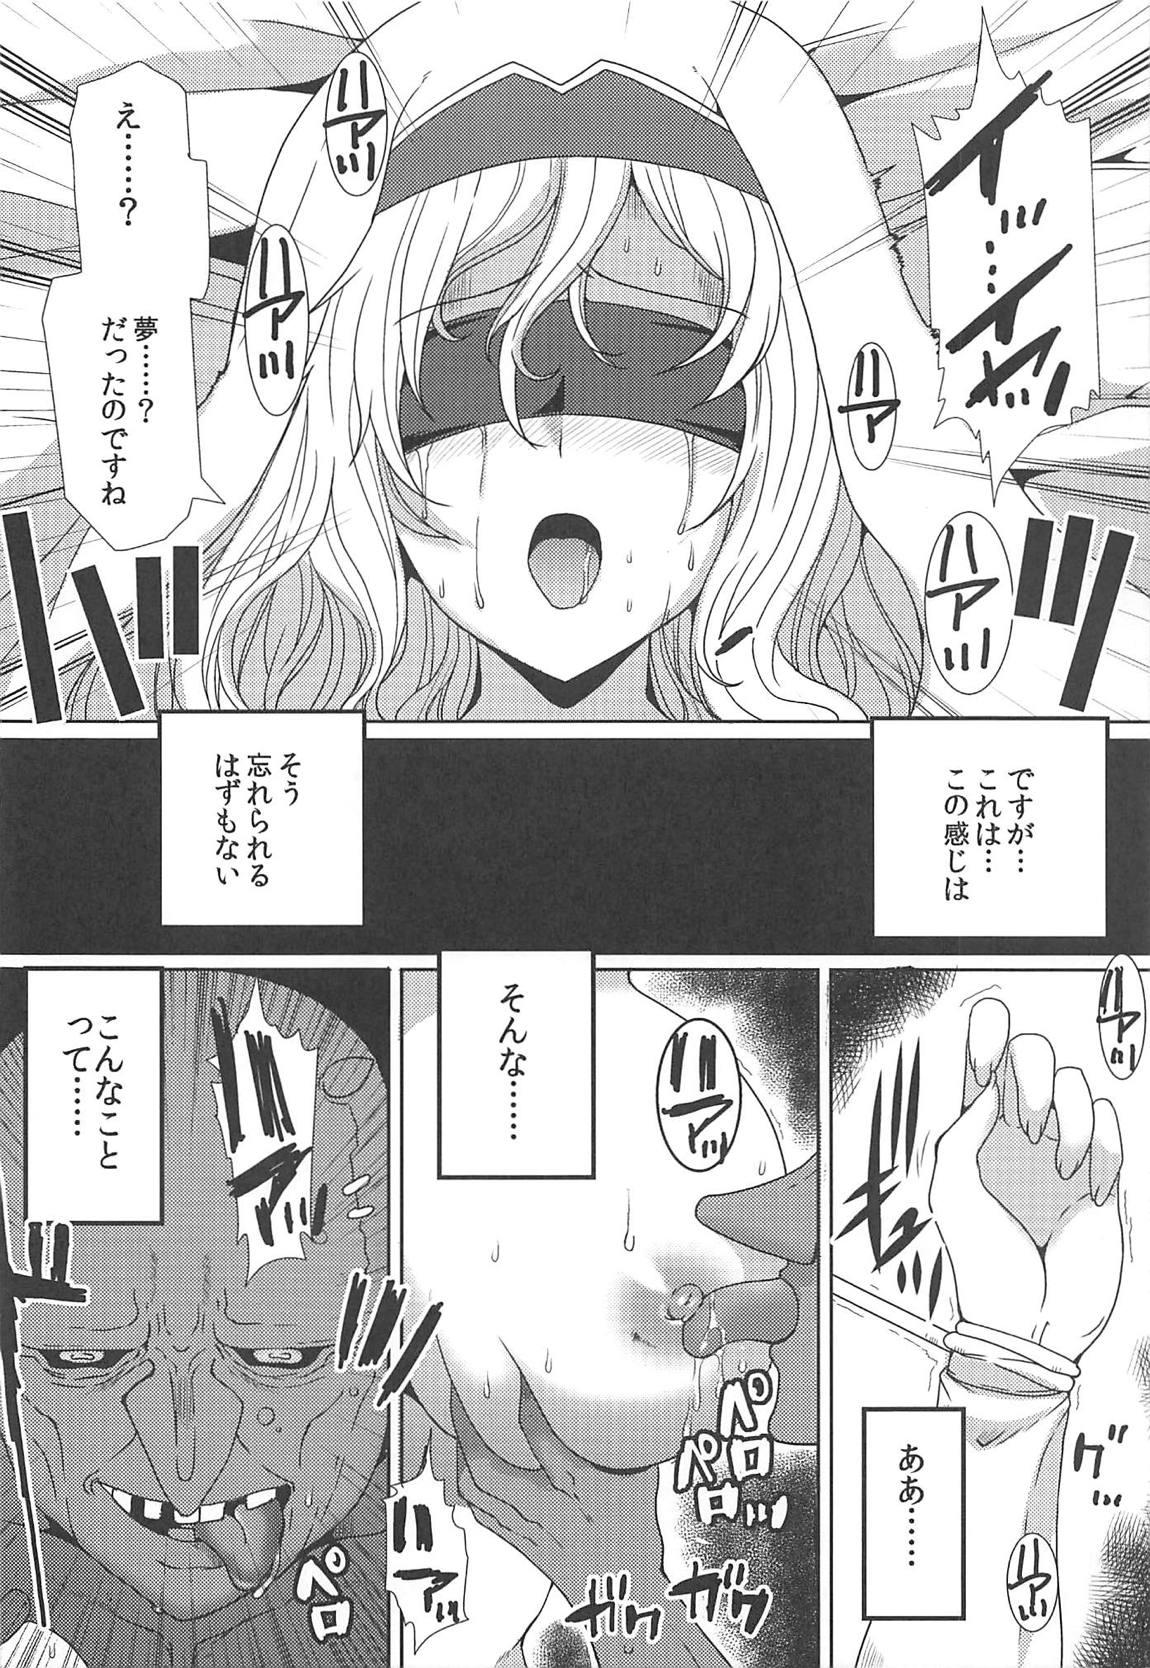 Tall Subete Yo wa Koto mo Nashi - All the world is things even without - Goblin slayer Newbie - Page 9